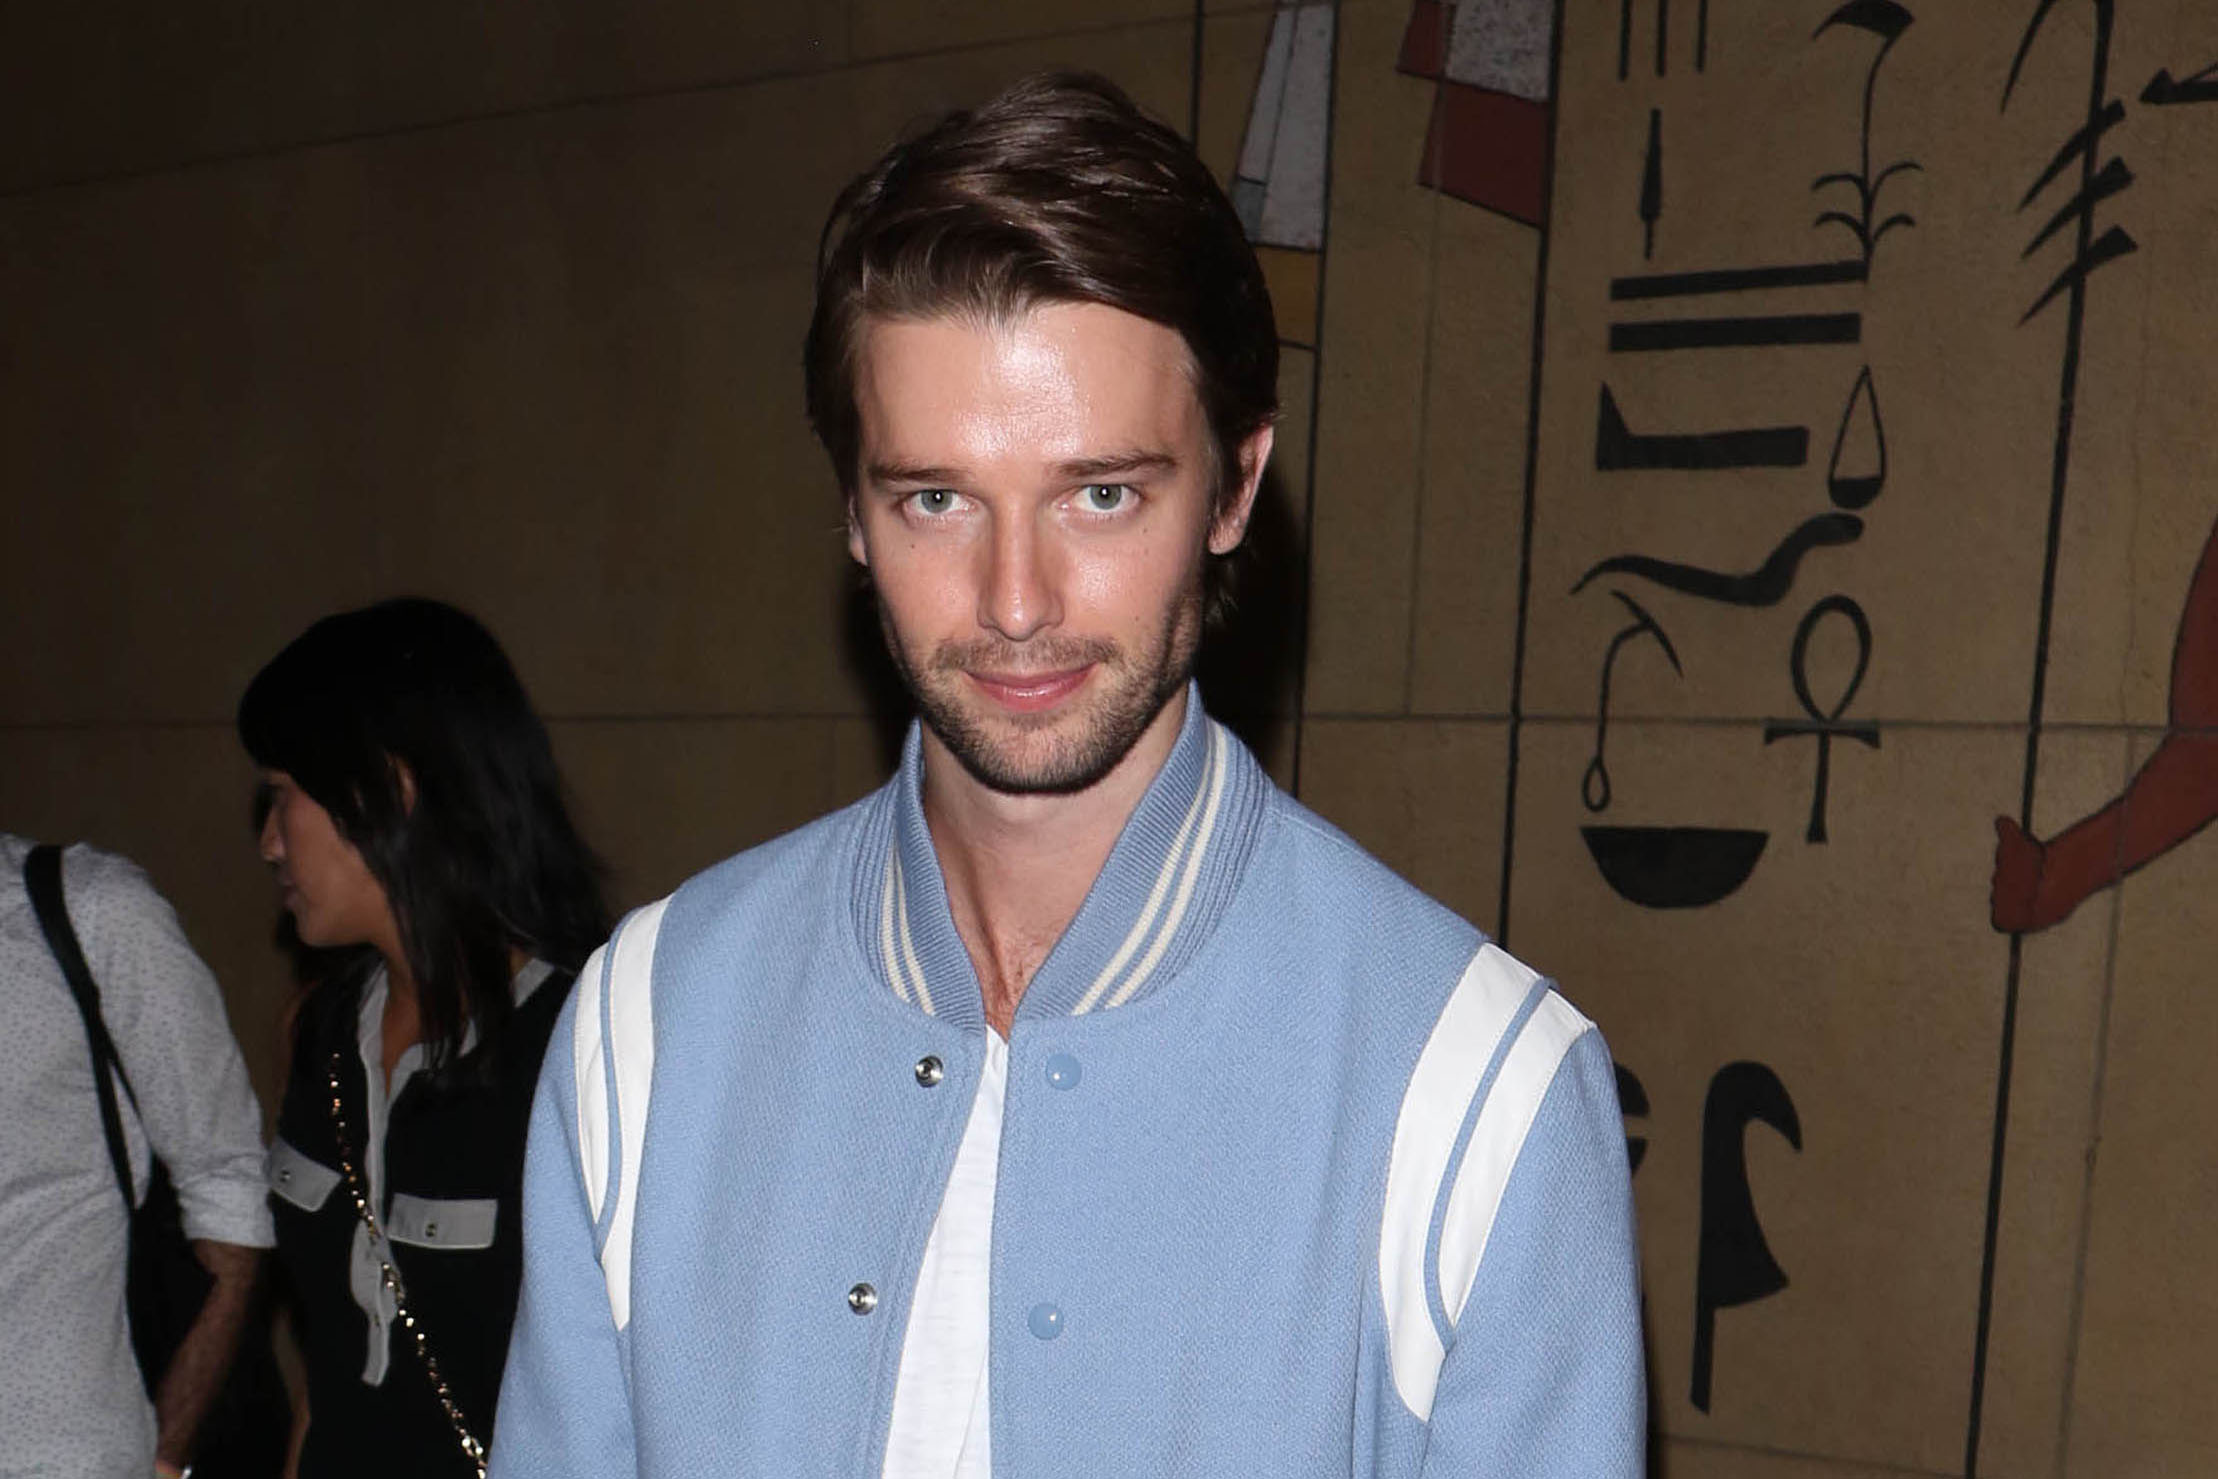 Patrick Schwarzenegger Eclipses Famous Father Arnold With His Outlandish Style